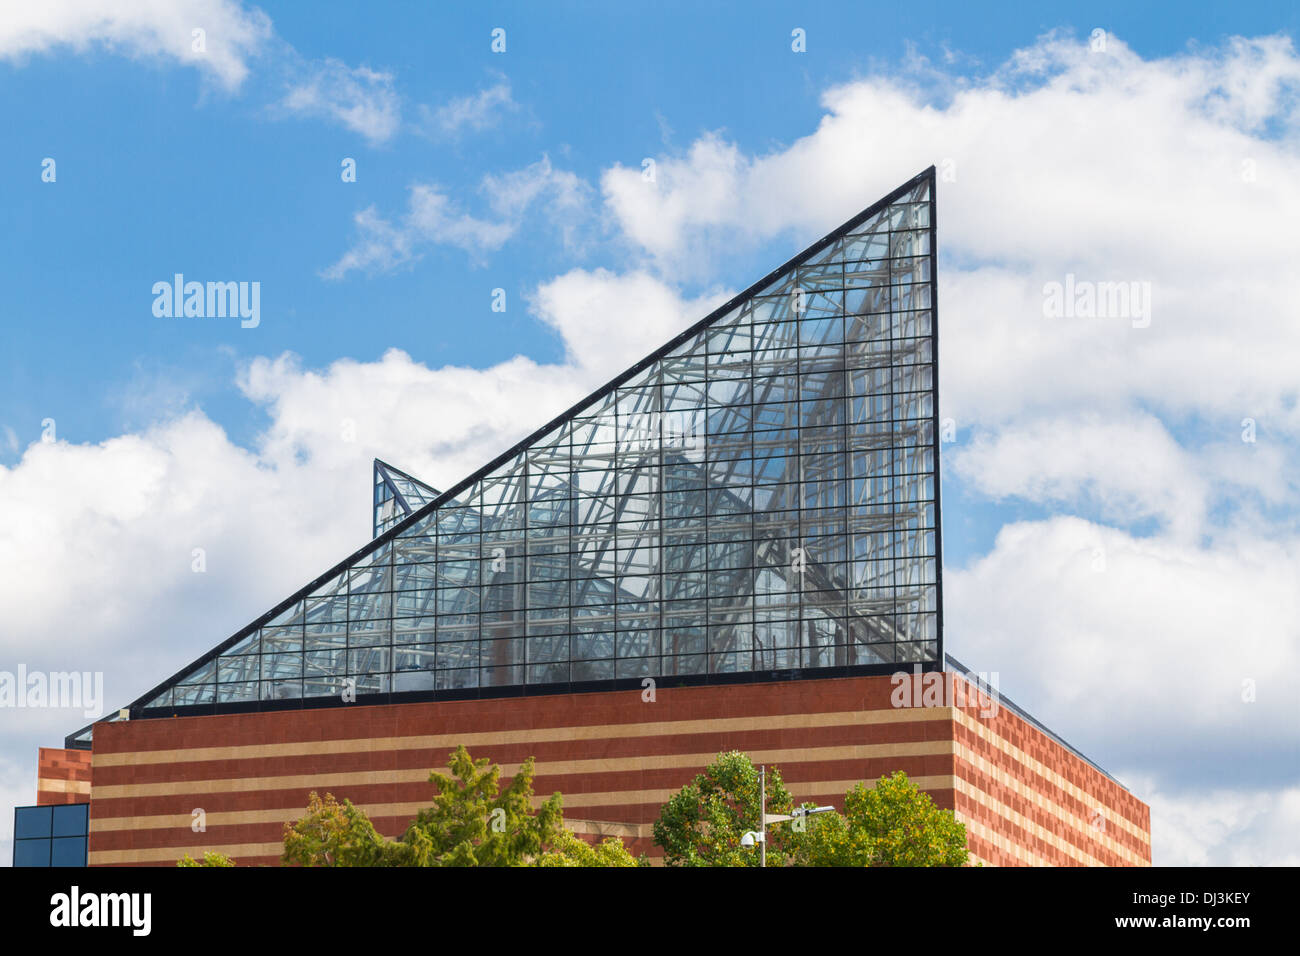 The Tennessee Aquarium, Chattanooga, Tennessee, against a blue, partly cloudy sky. Stock Photo